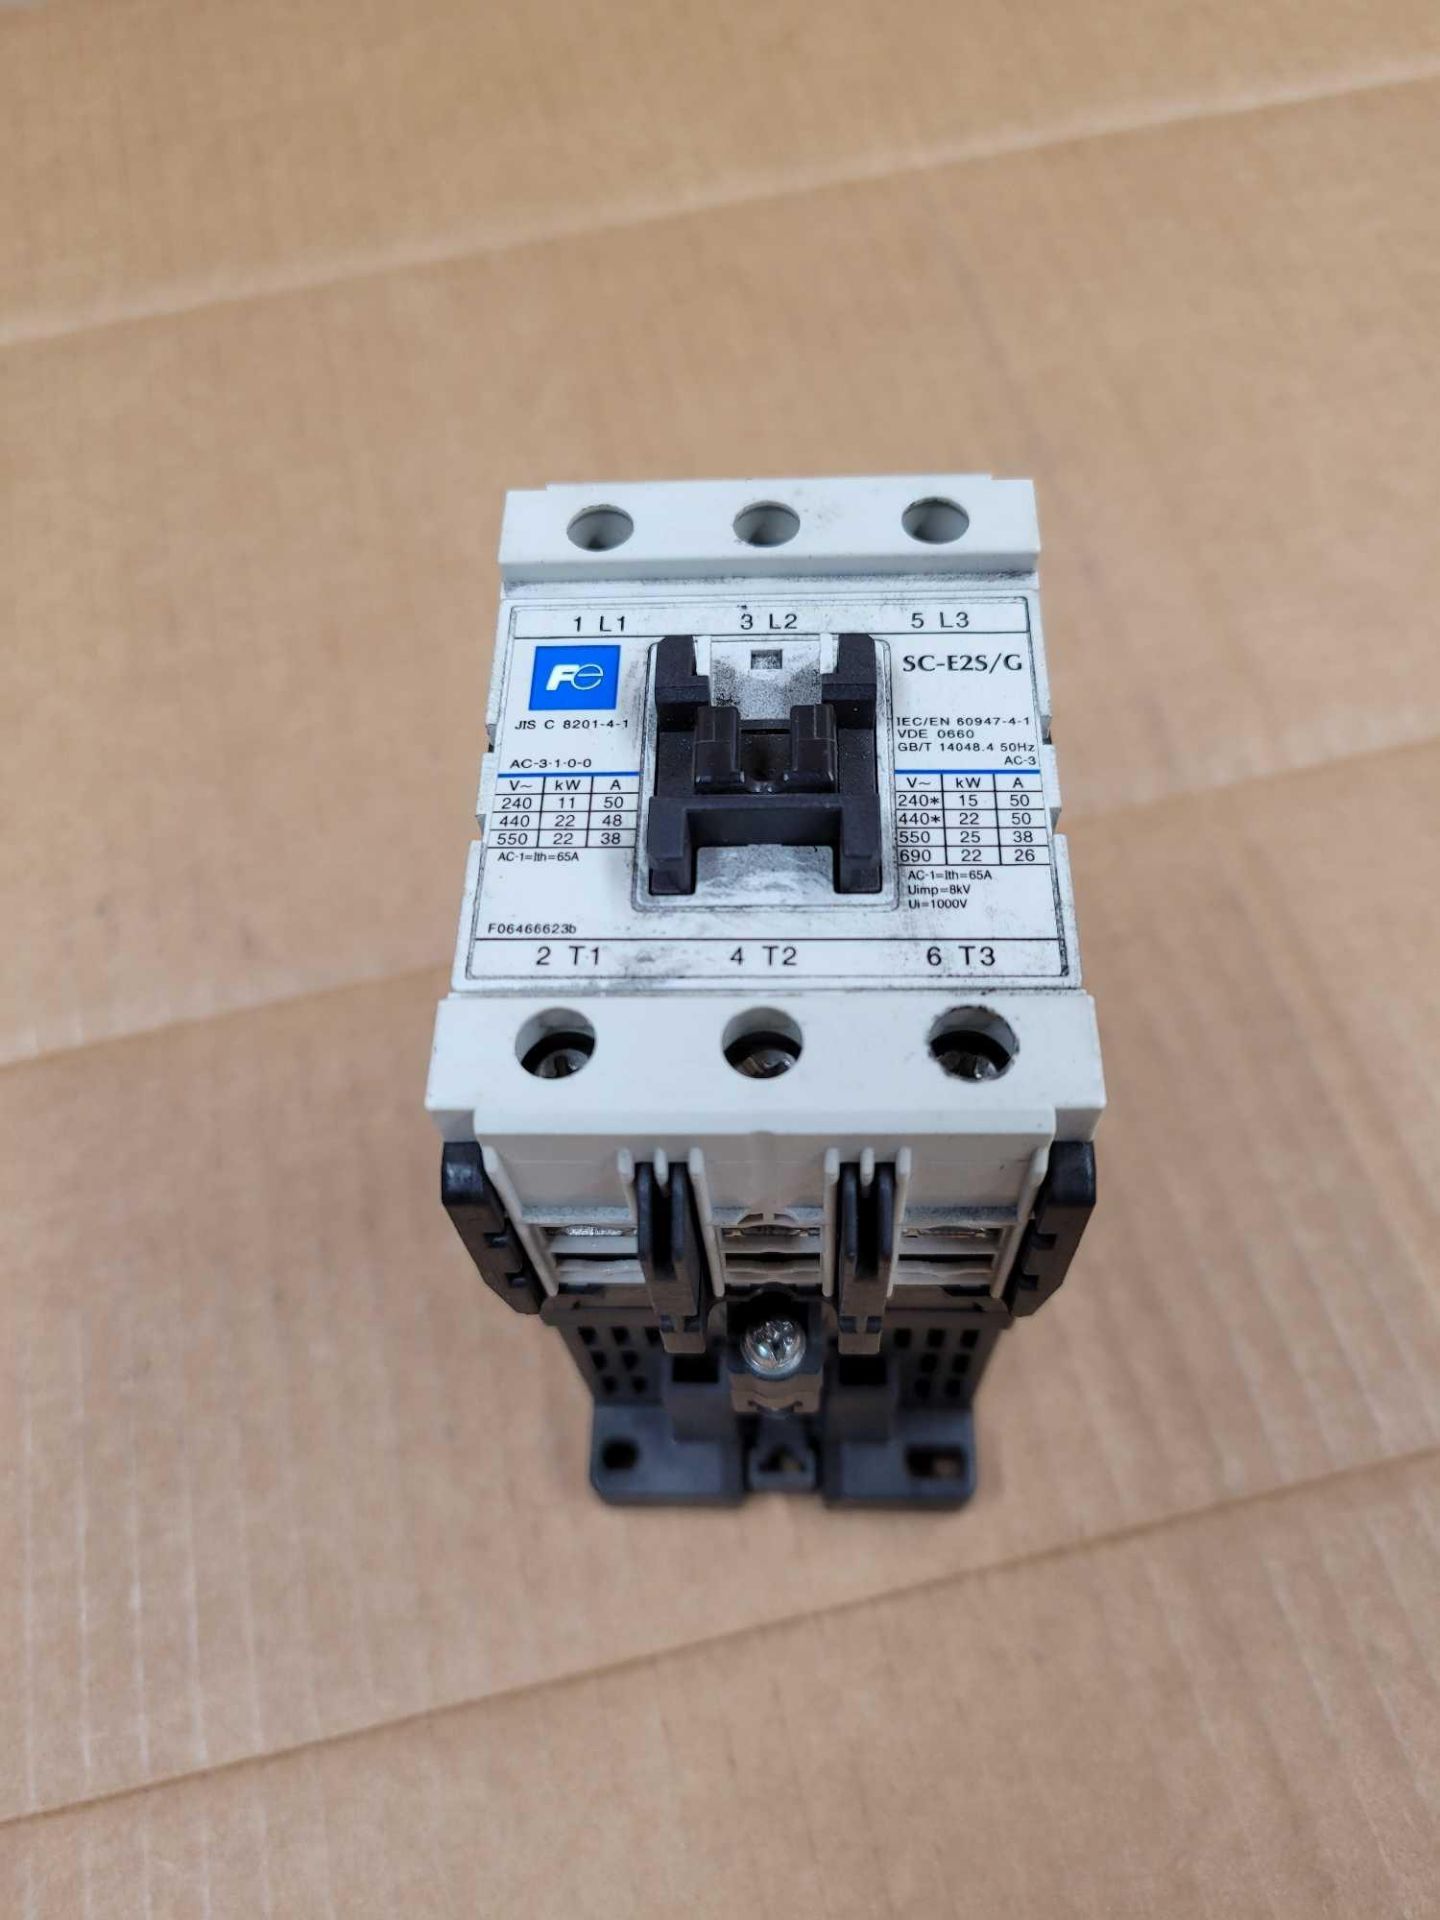 LOT OF 5 SC-E2S/G  /  Contactor  /  Lot Weight: 9.0 lbs - Image 2 of 9